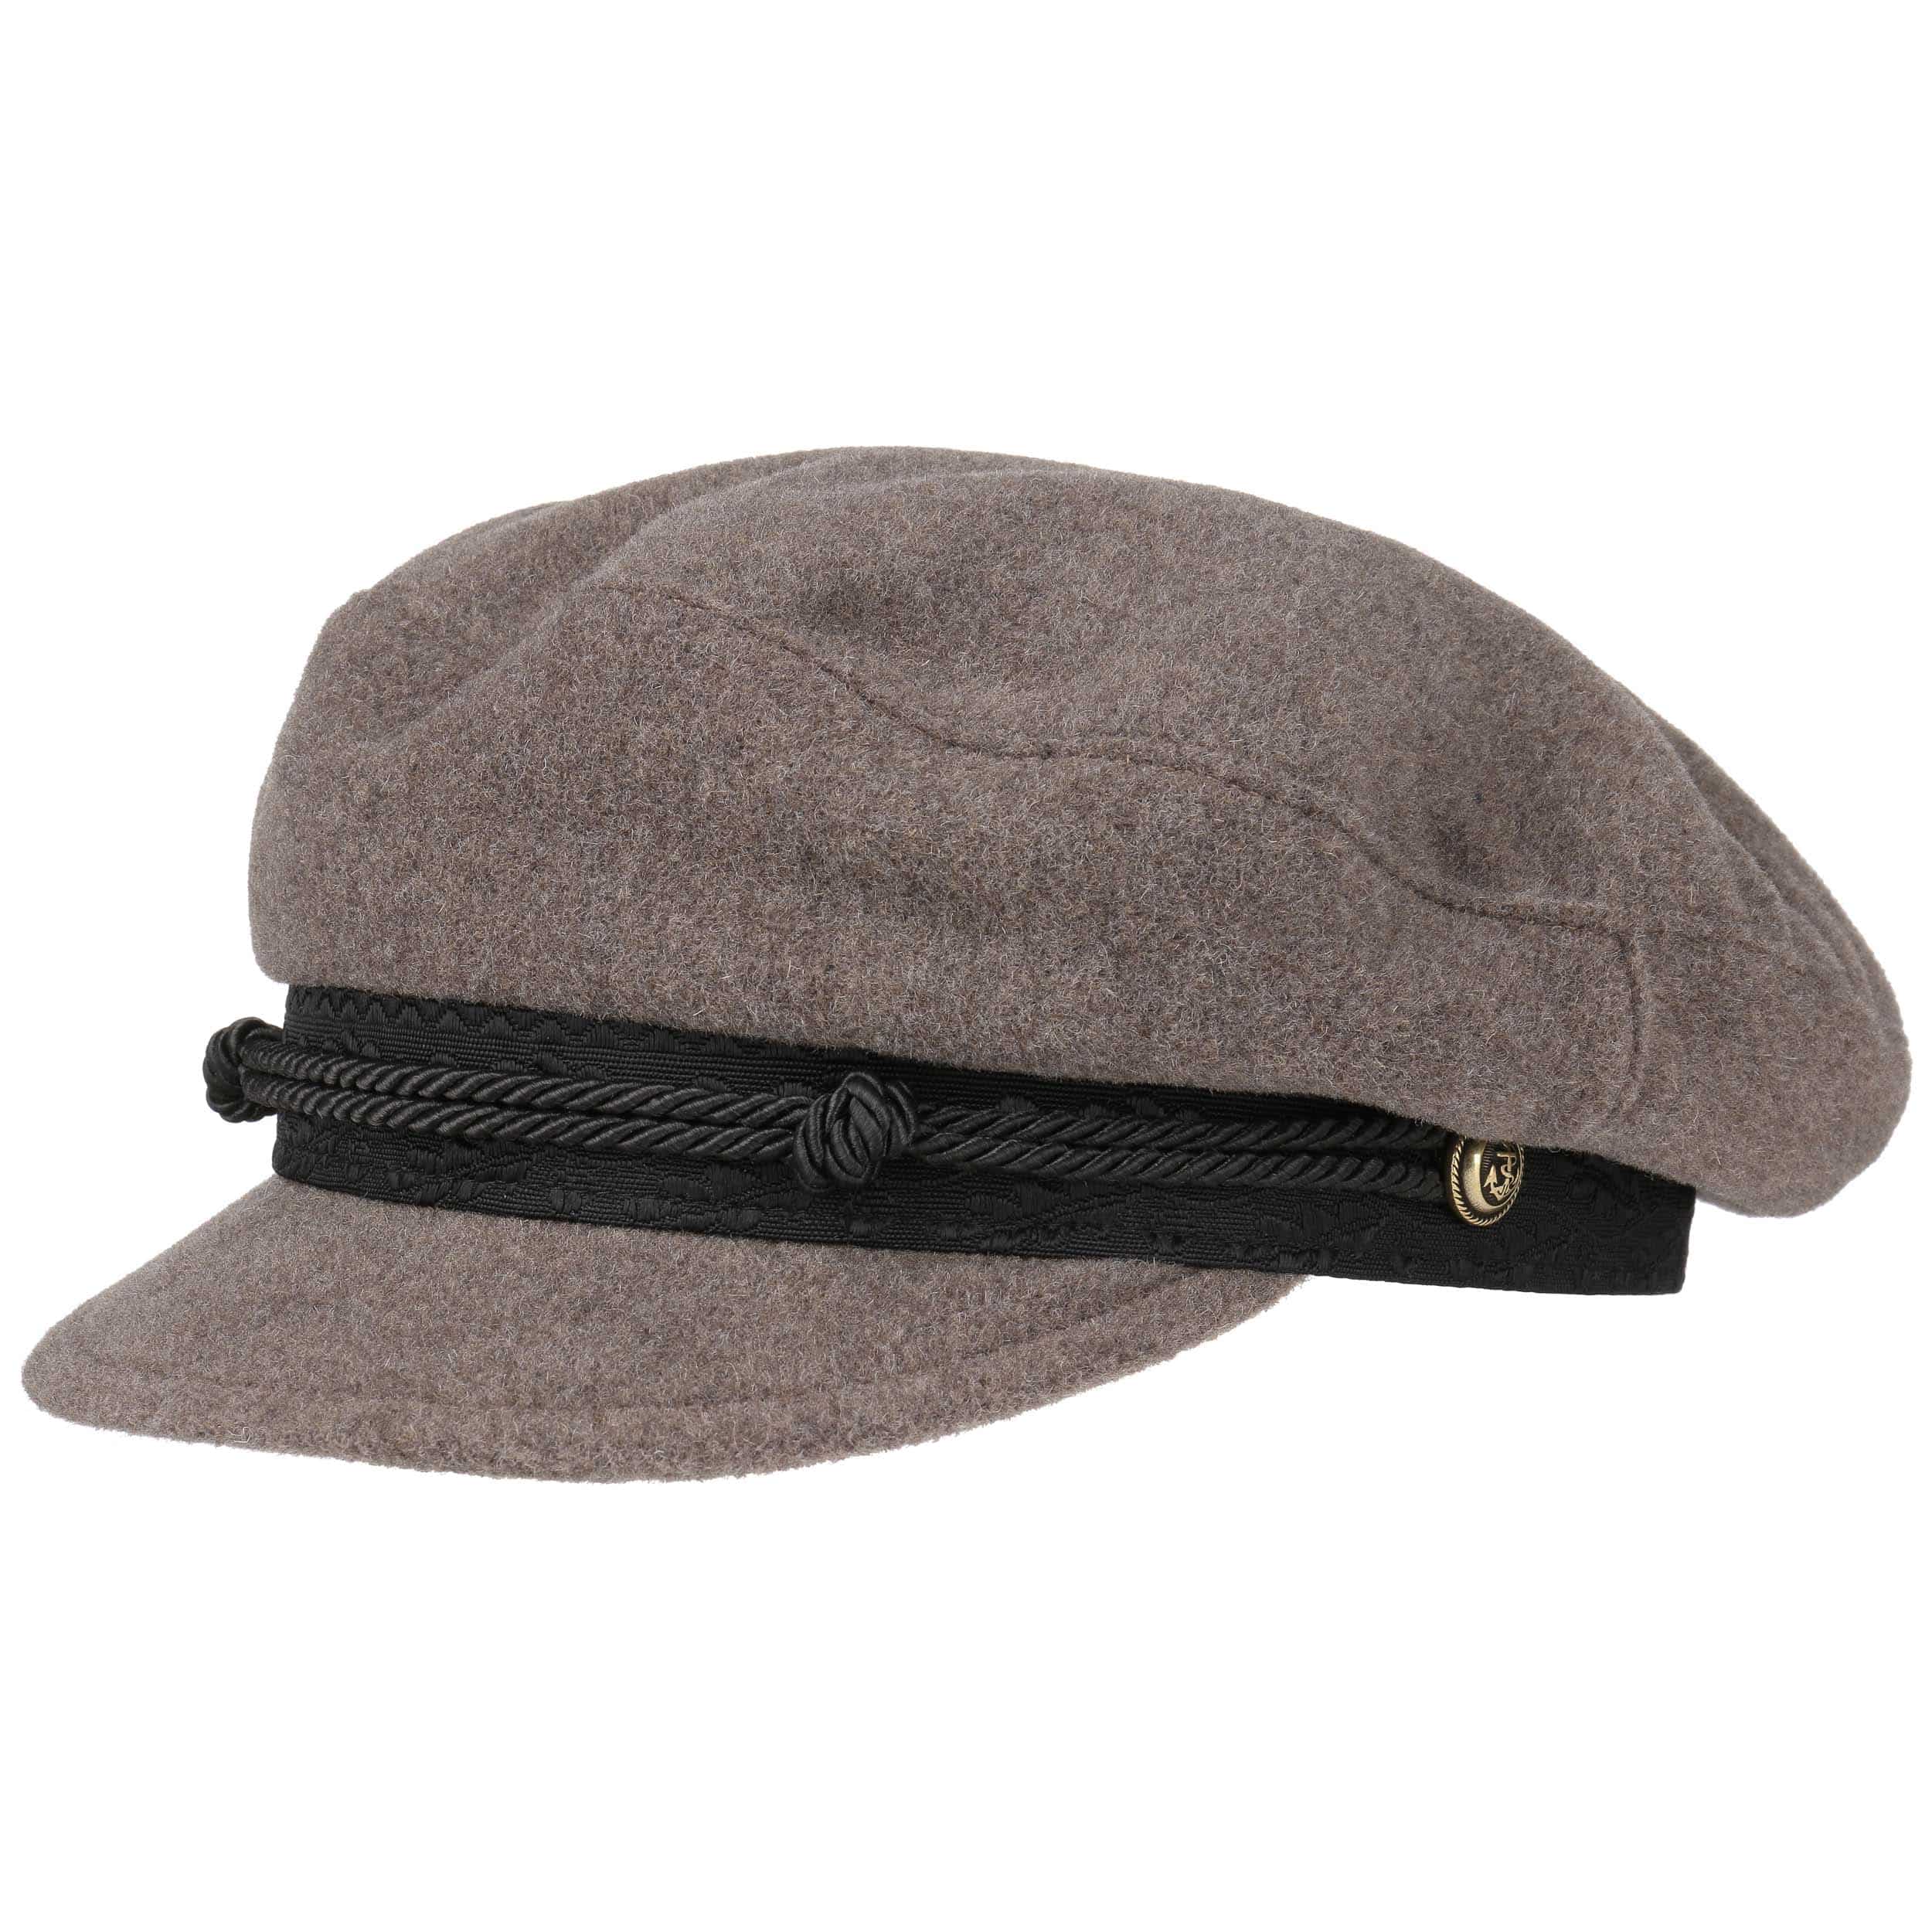 Wool Cashmere Riders Cap by Stetson - 59,00